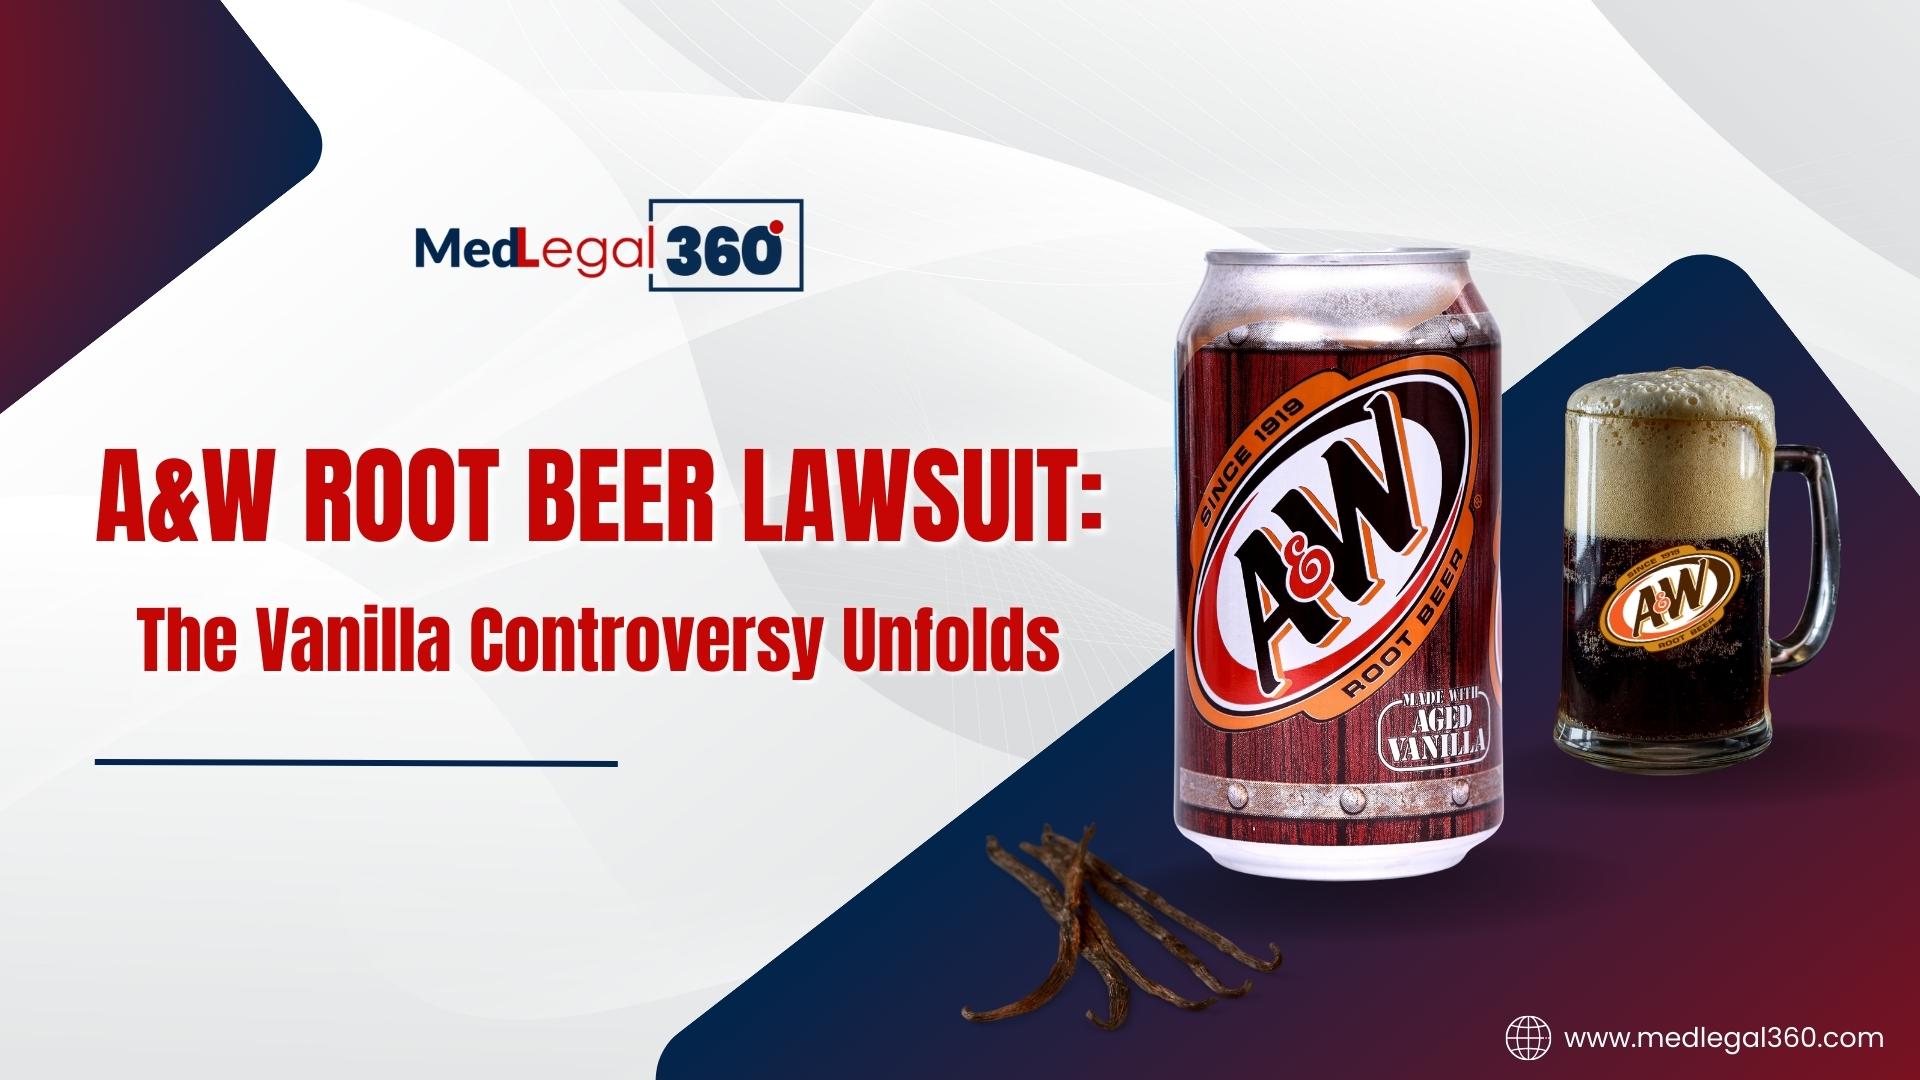 A&W Root Beer Lawsuit: The Vanilla Controversy Unfolds